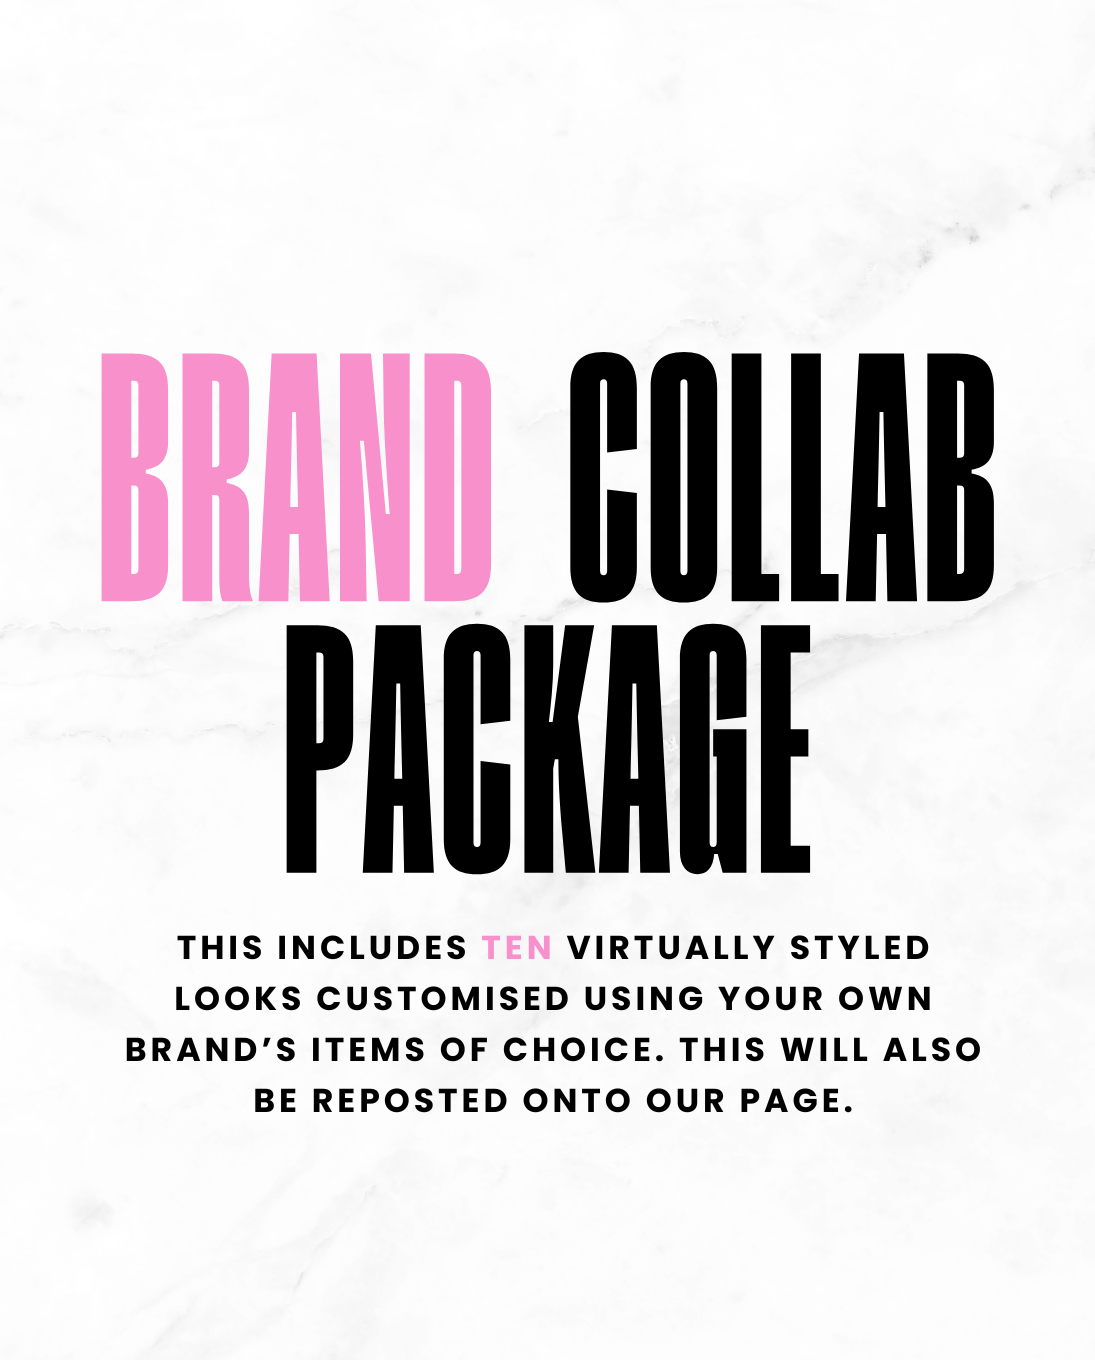 Brand Collab Package